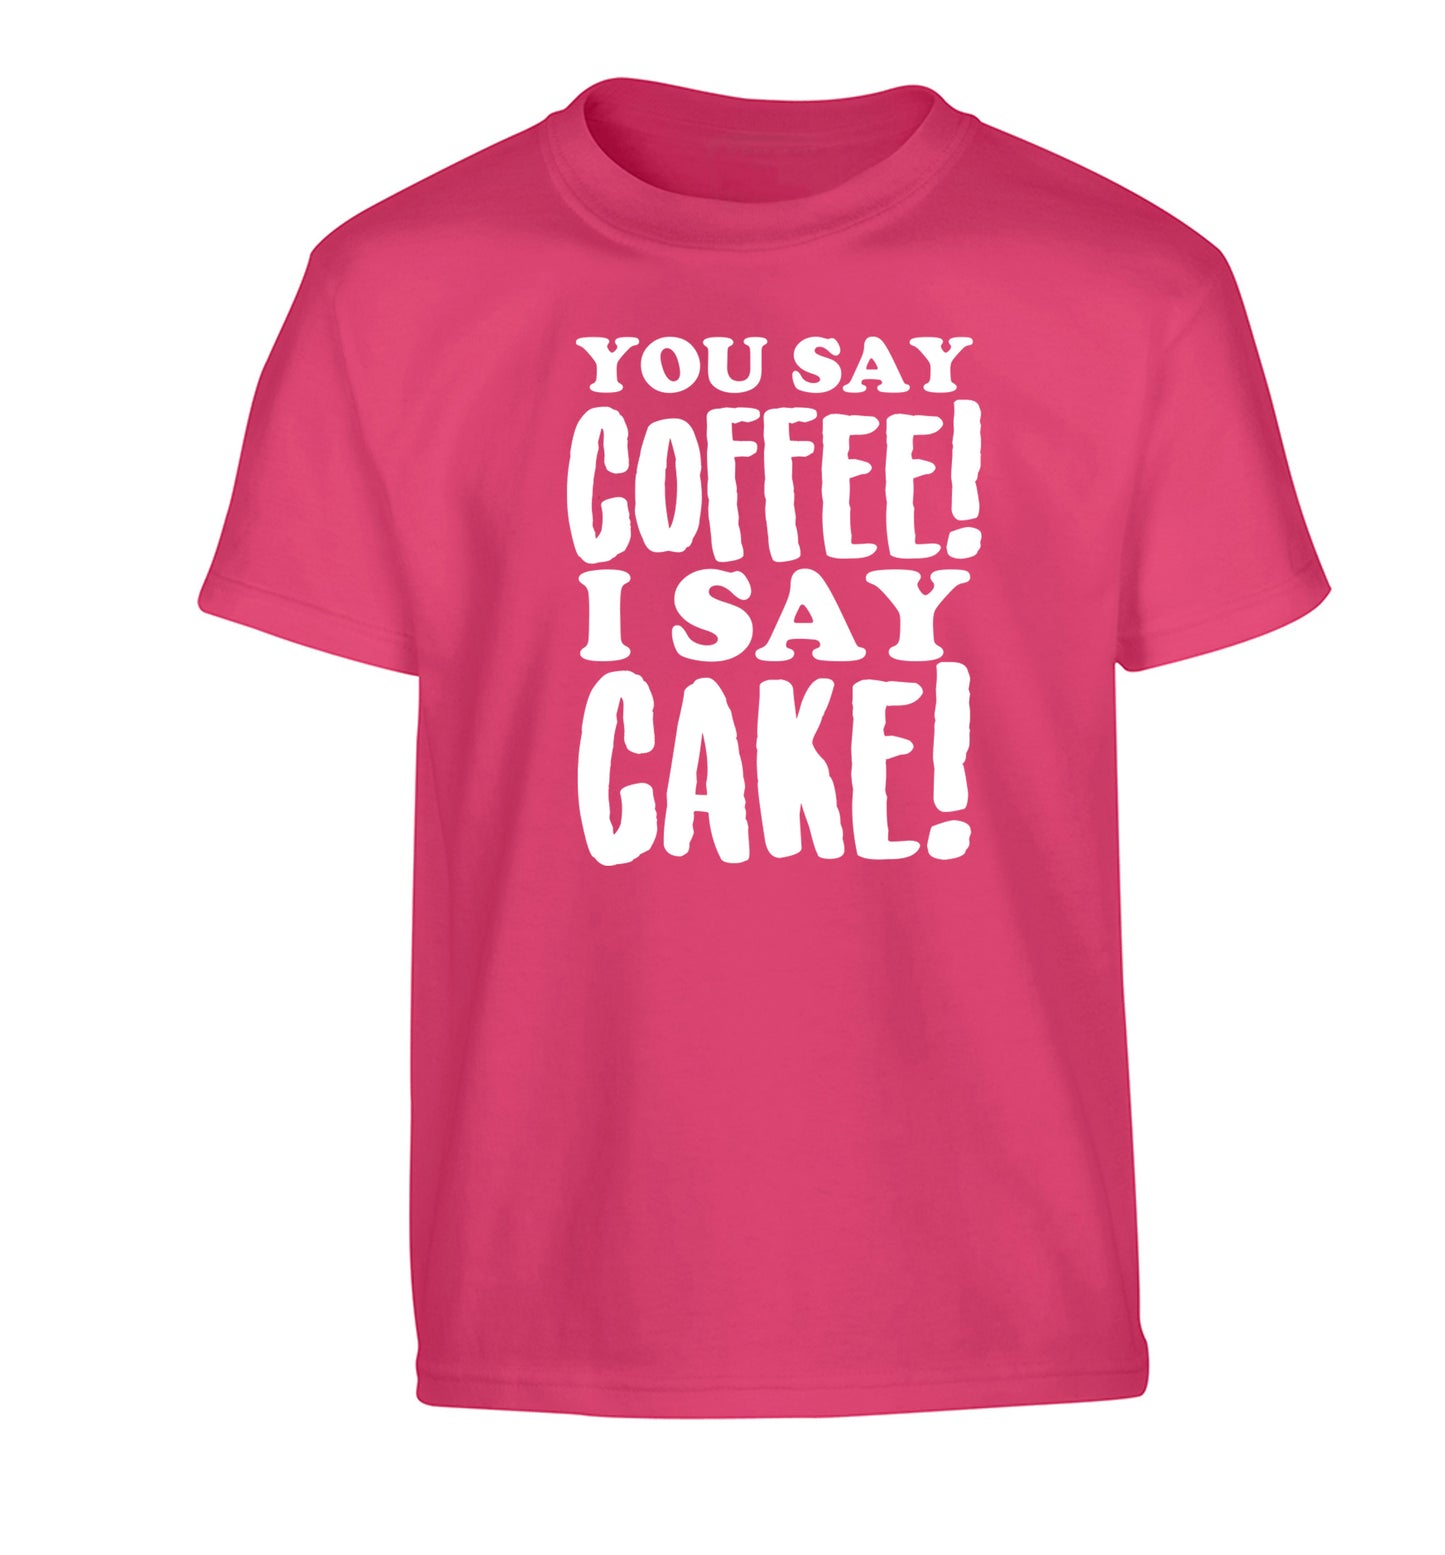 You say coffee I say cake! Children's pink Tshirt 12-14 Years